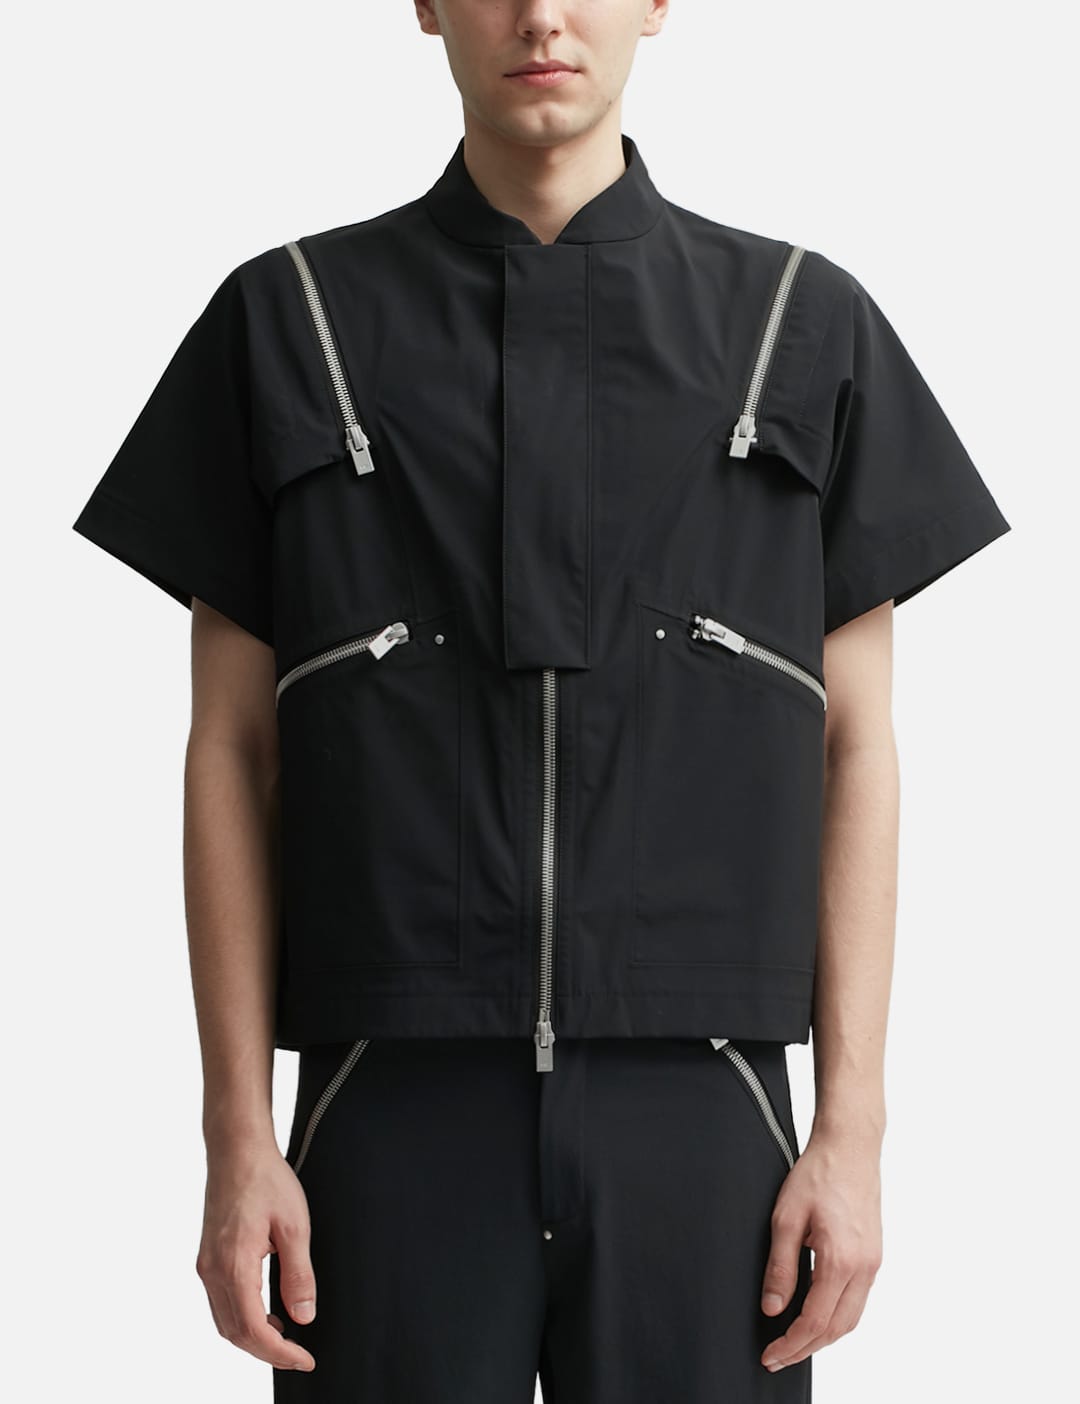 Heliot Emil - ANOPHYTE TECHNICAL VEST | HBX - Globally Curated